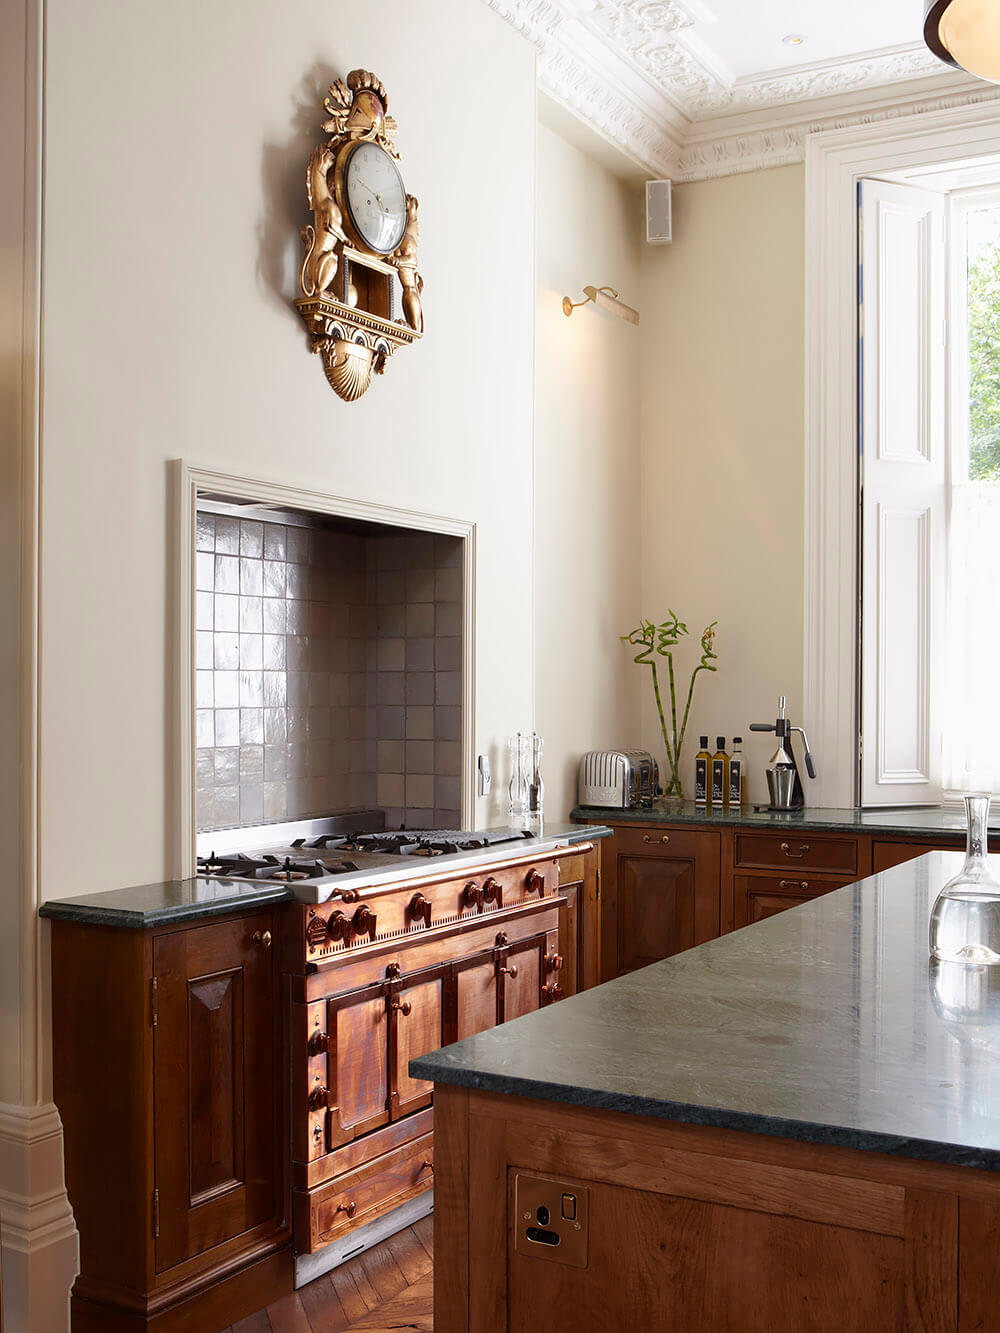 Luxury bespoke kitchen in Ladbroke Grove with parquet floor, wooden cupboards and antique clock on the wall.